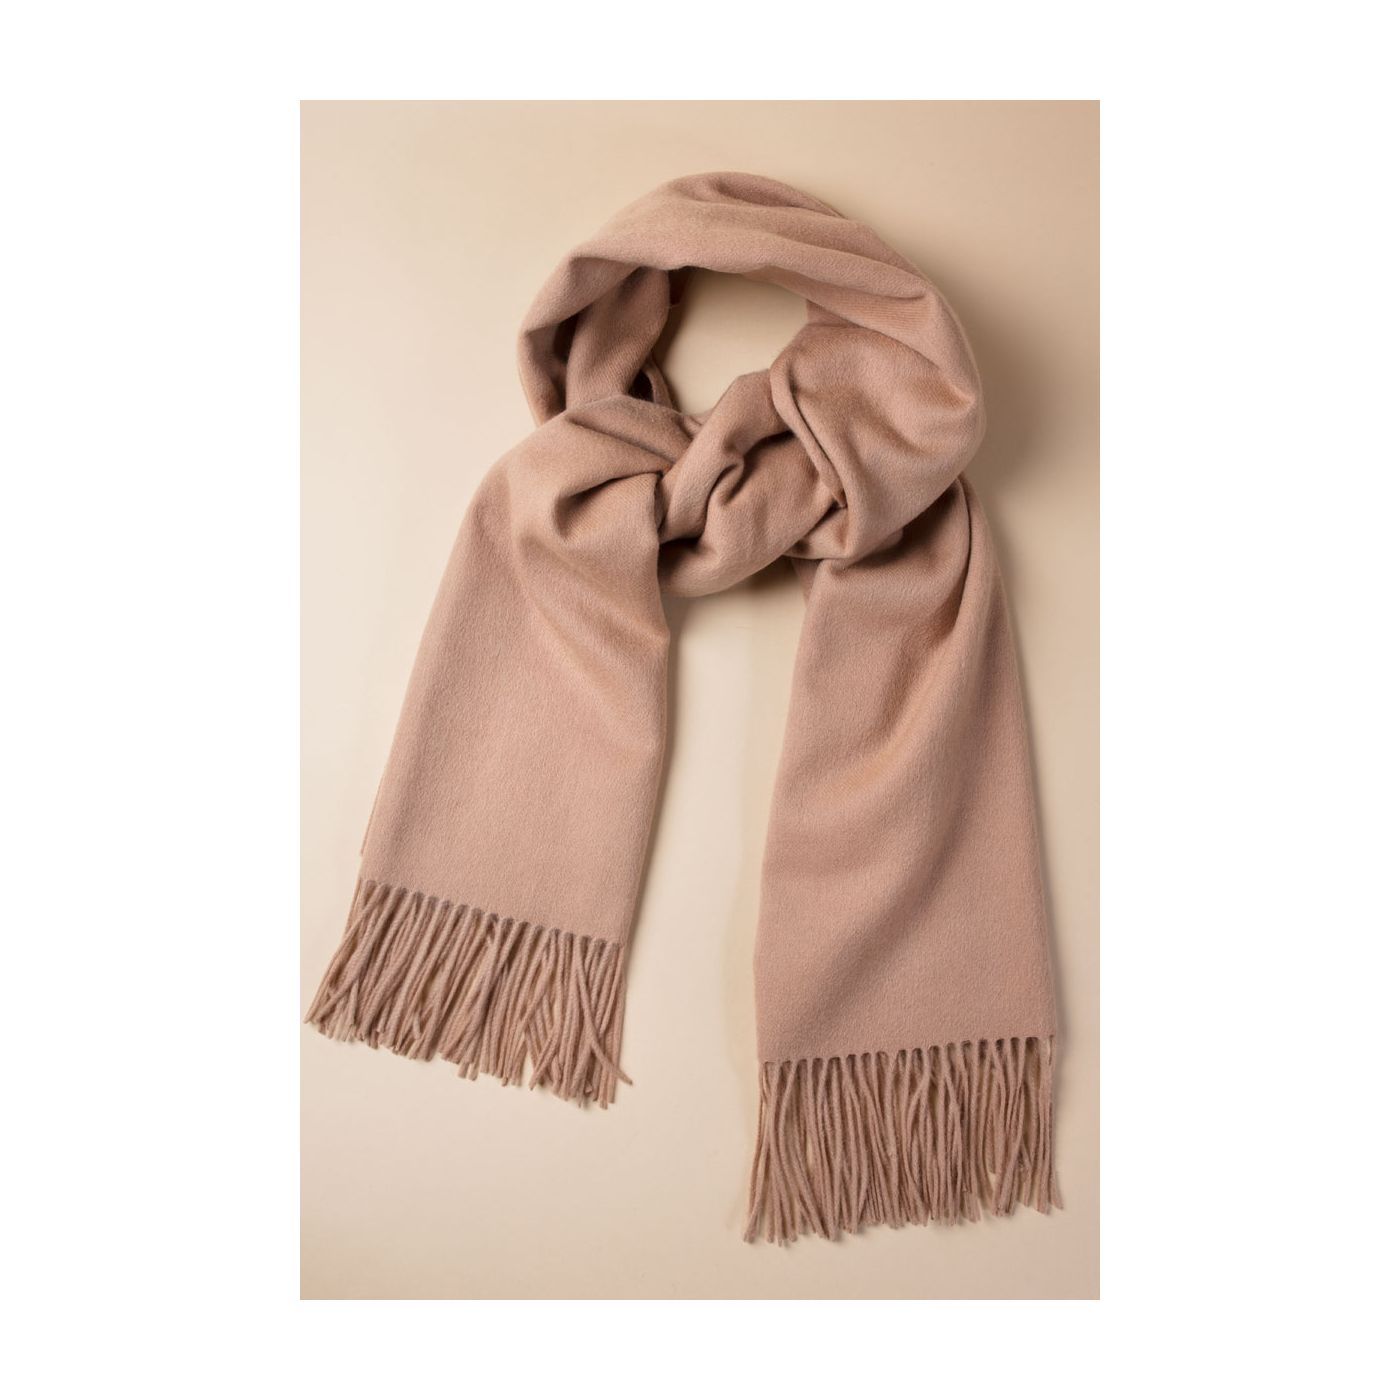 Scarf for men made of Merino wool in Light brown